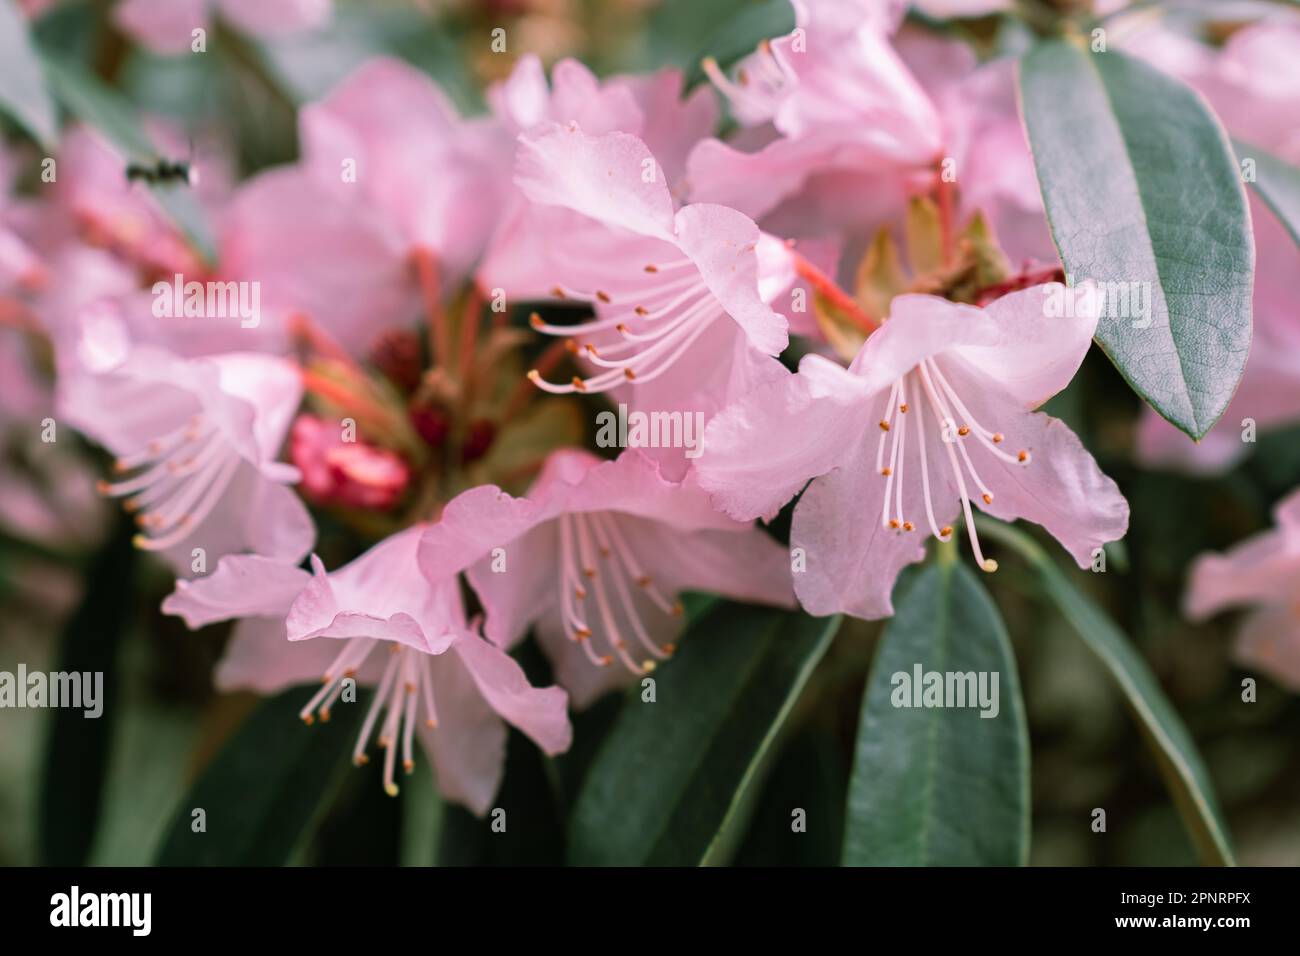 Rhododendron principis is an evergreen shrub growing 2 to 6 m tall with leathery leaves and pink flowers. Stock Photo